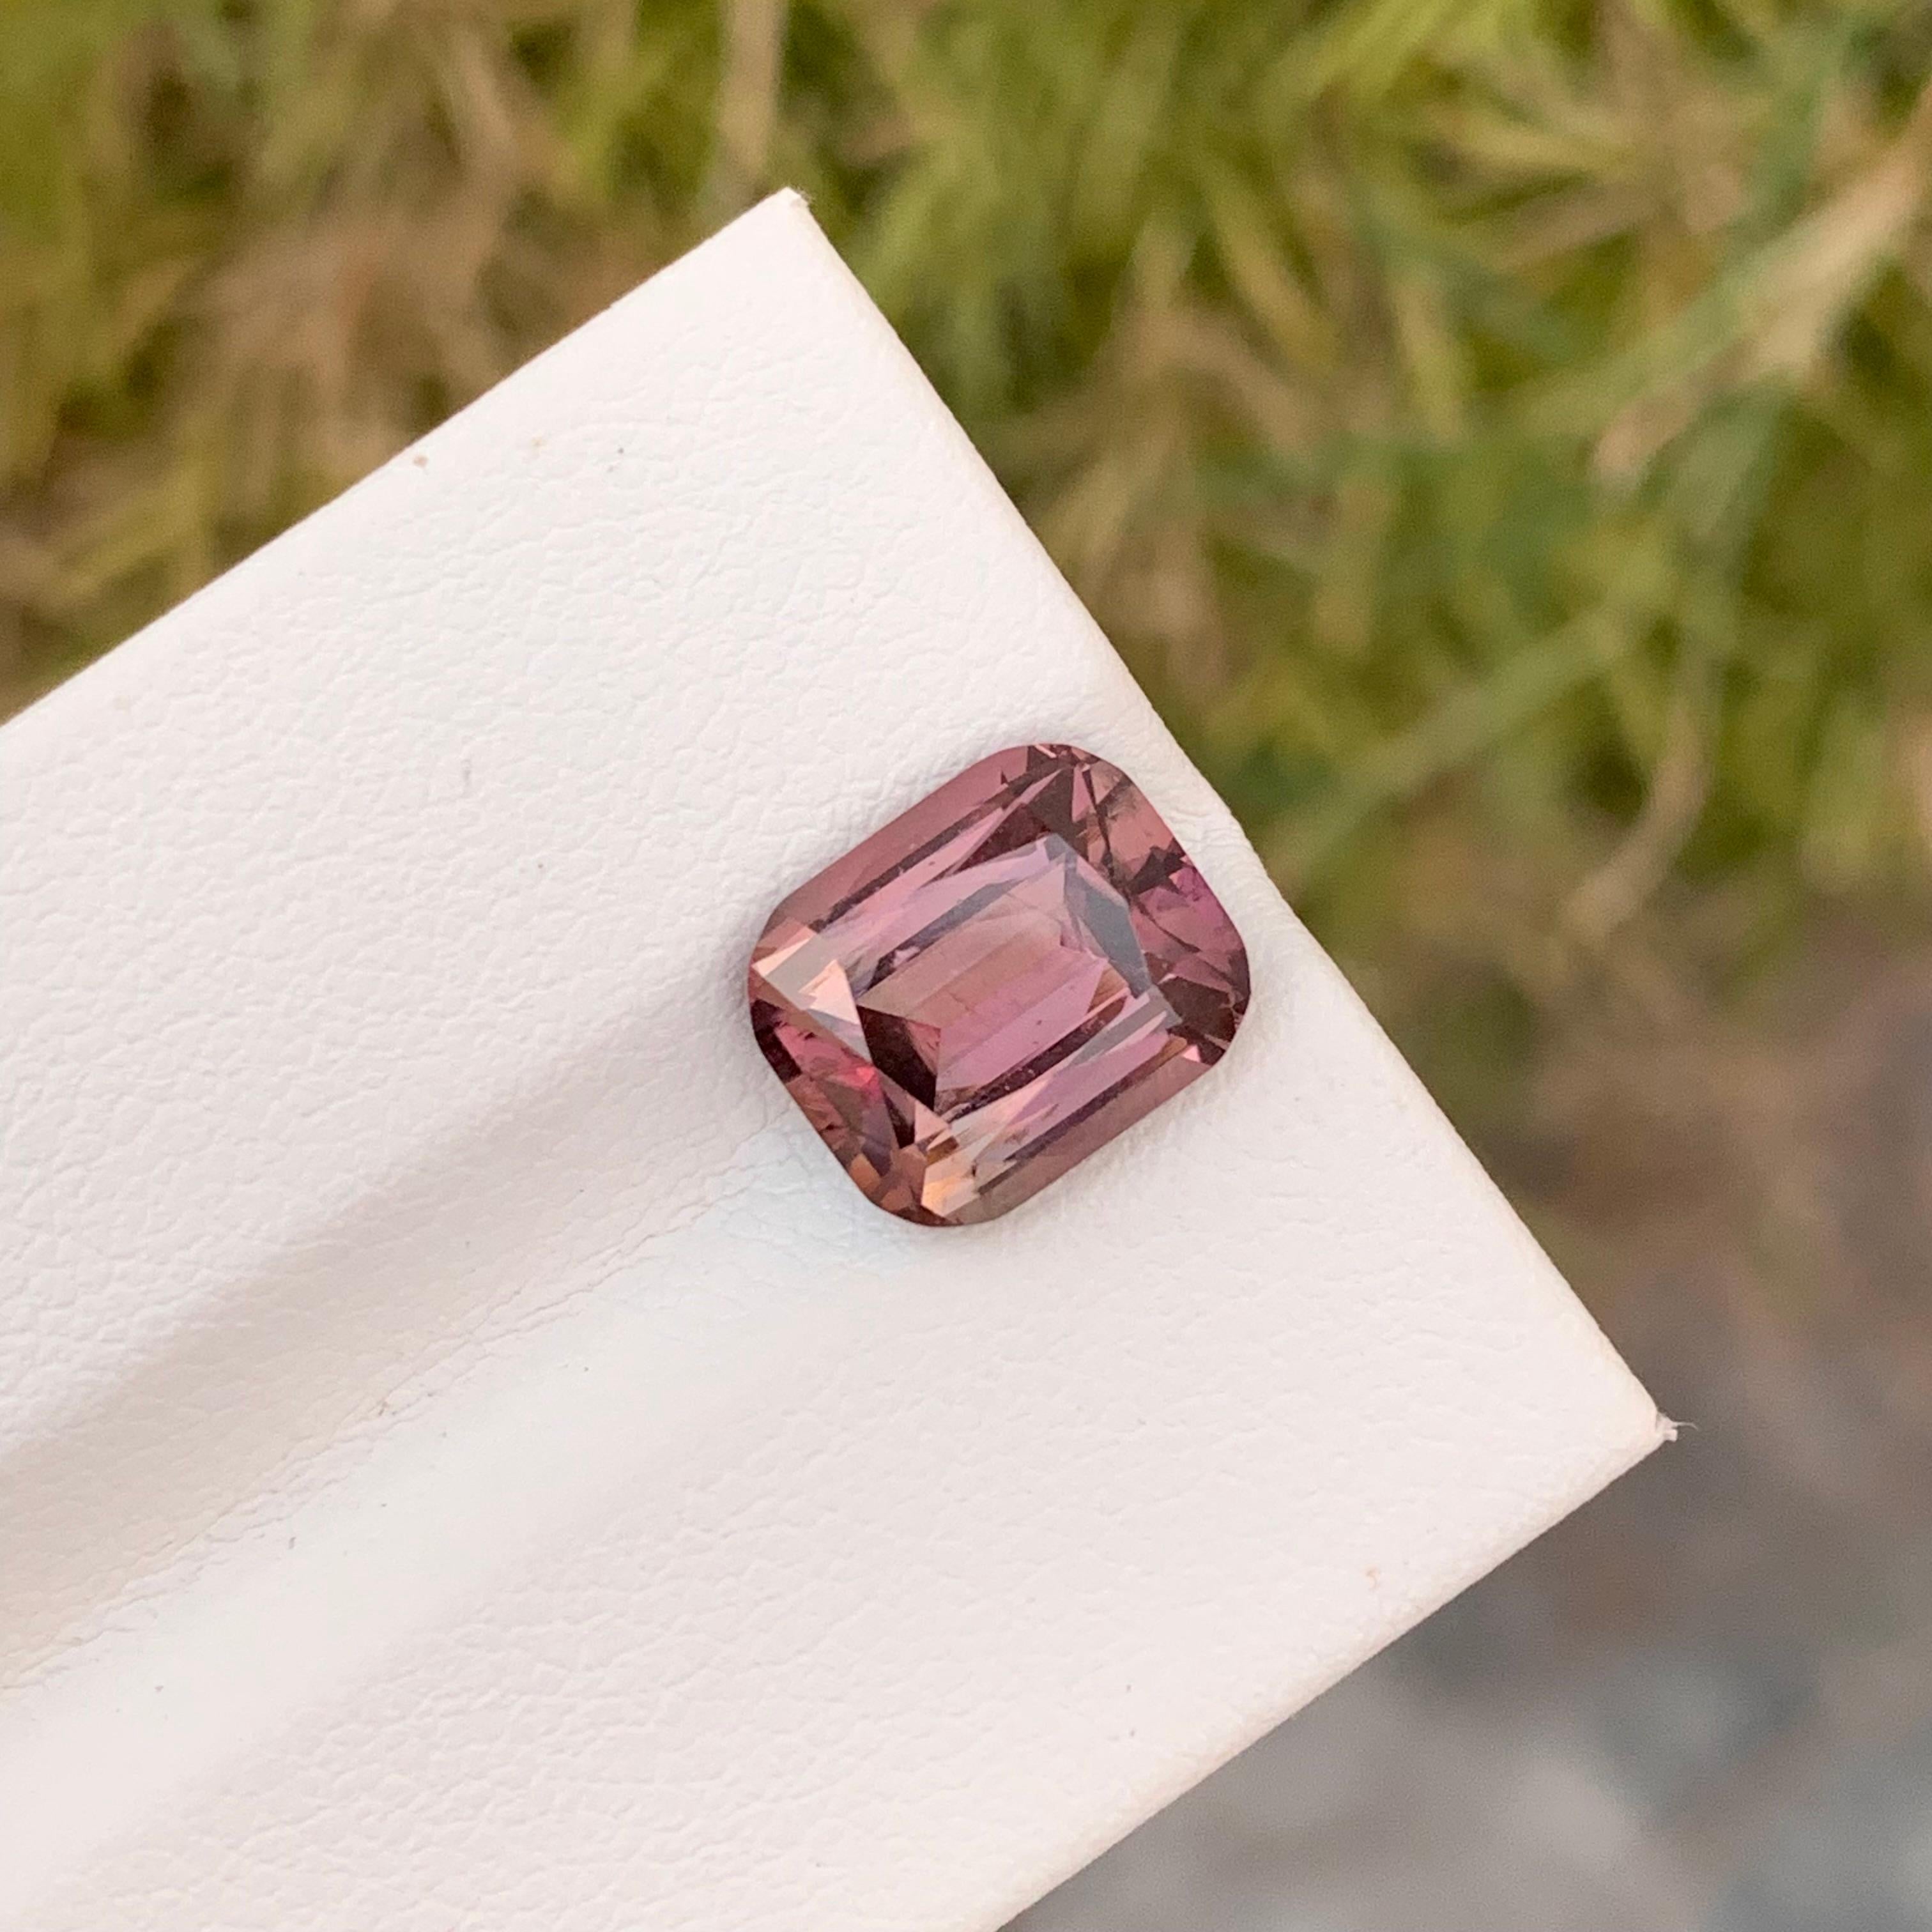 3.75 Carat Pretty Loose Peach Pink Tourmaline Cushion Shape Gem From Afghanistan For Sale 4